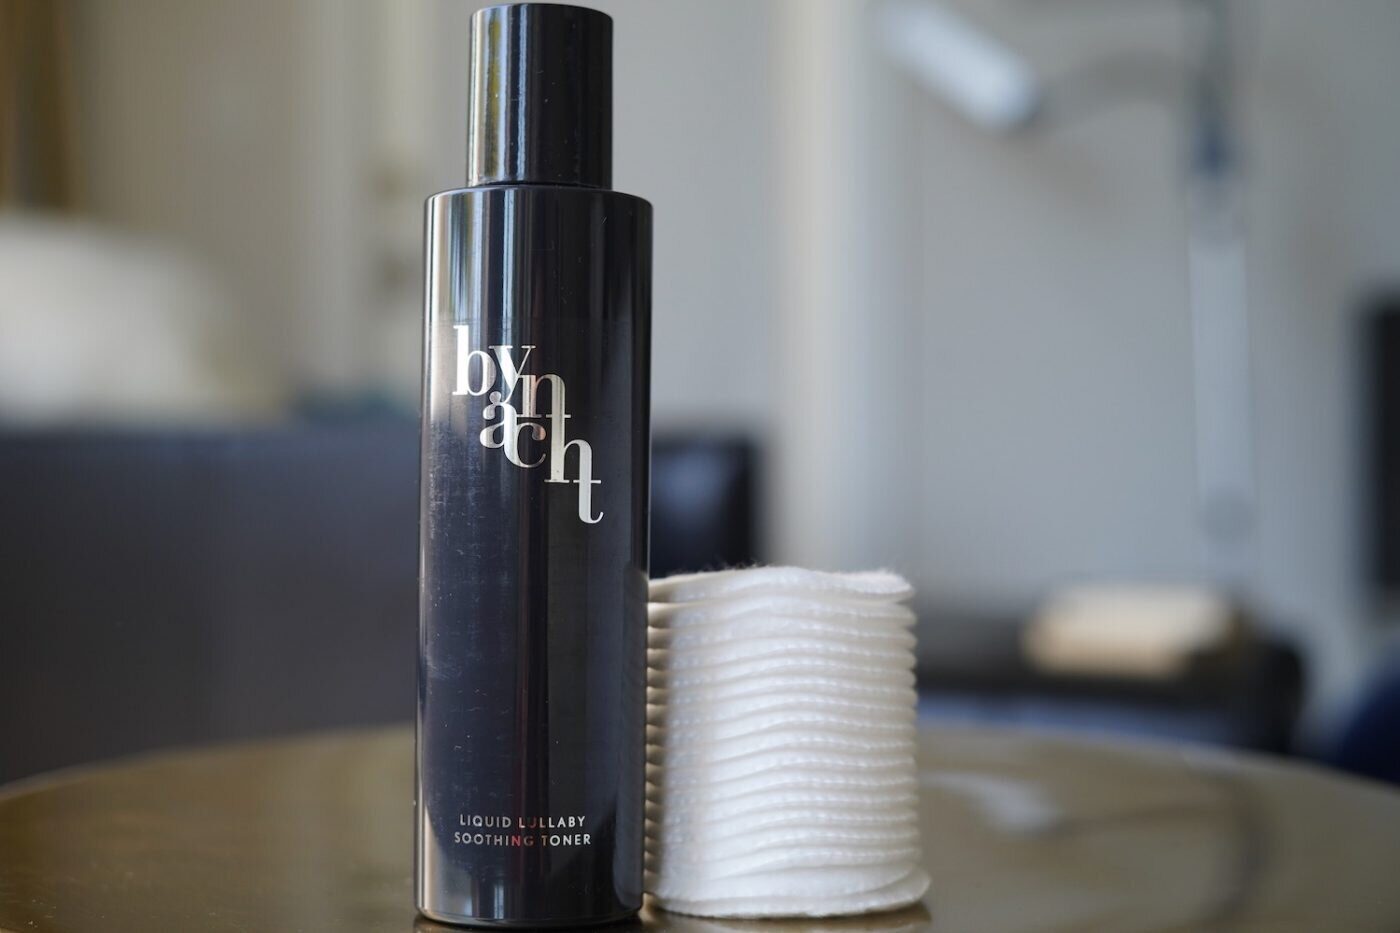 bynacht skincare review by nacht